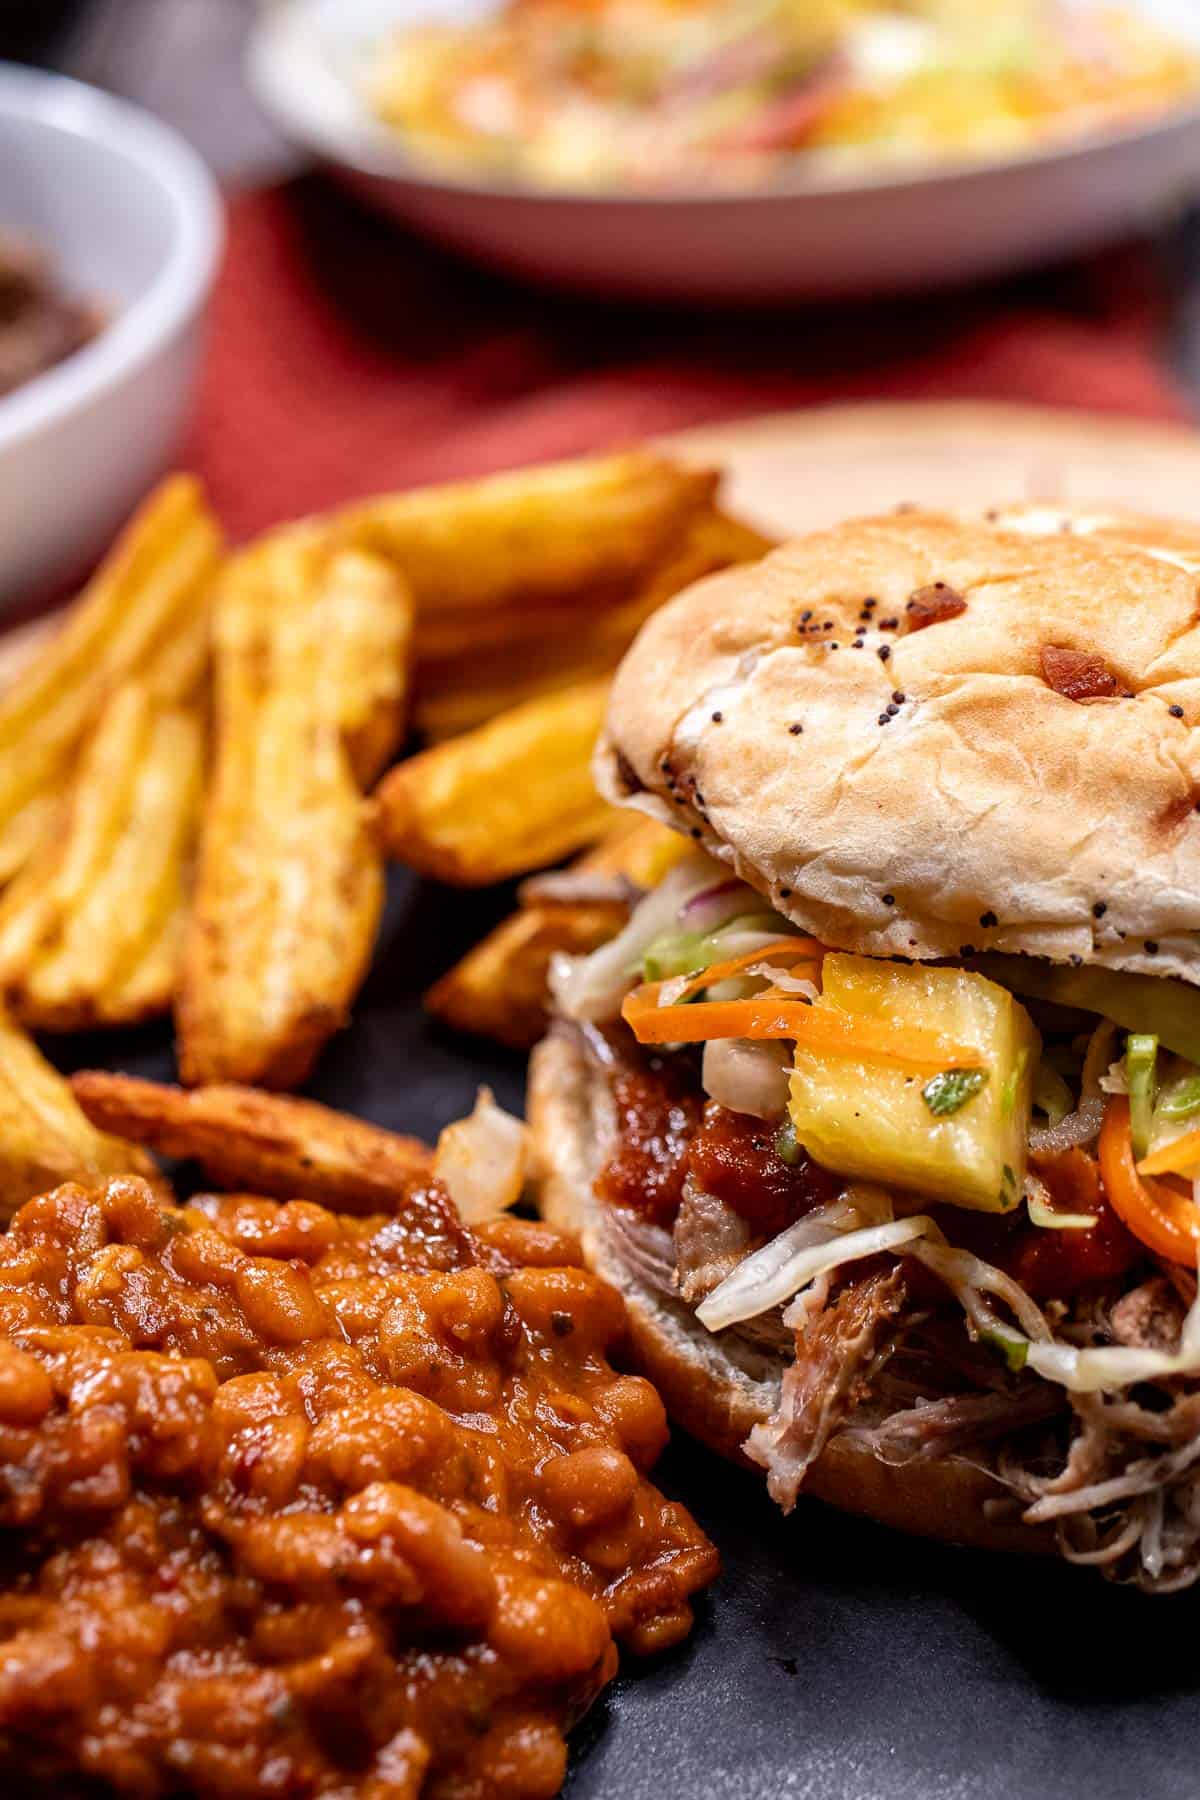 Guinness pulled pork sandwich with fries, smoky BBQ baked beans, and topped with spicy pineapple slaw.